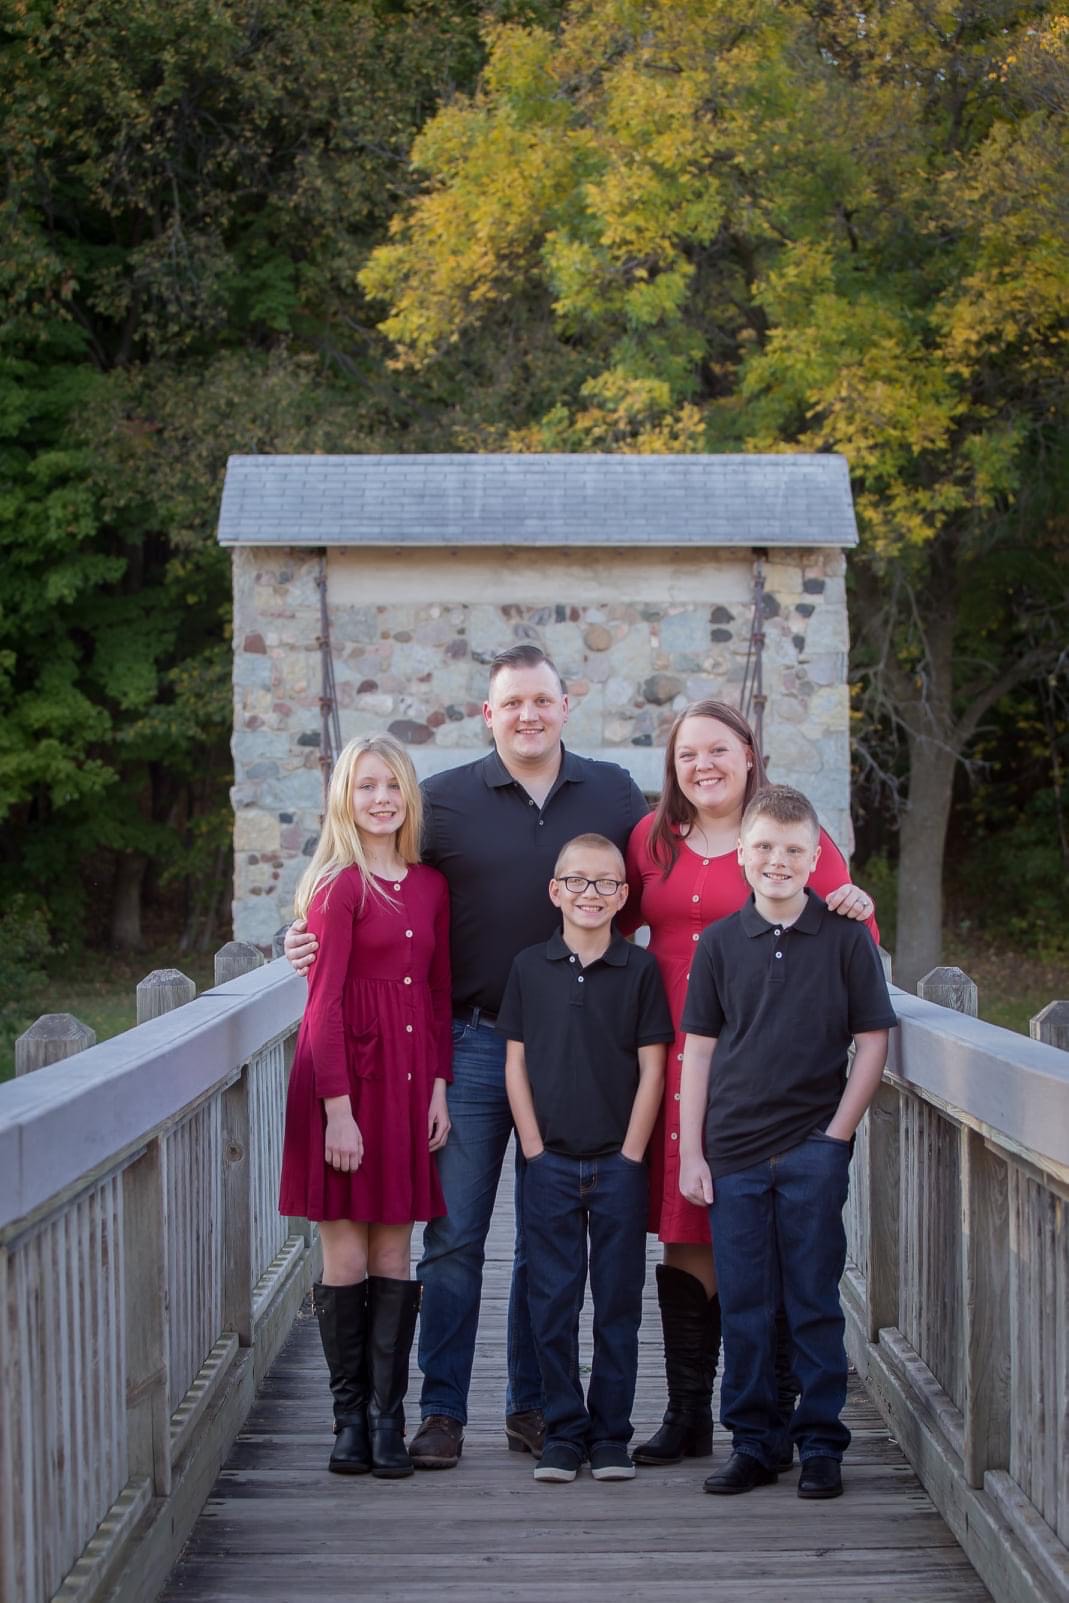 A family of five poses on a bridge with trees in the background